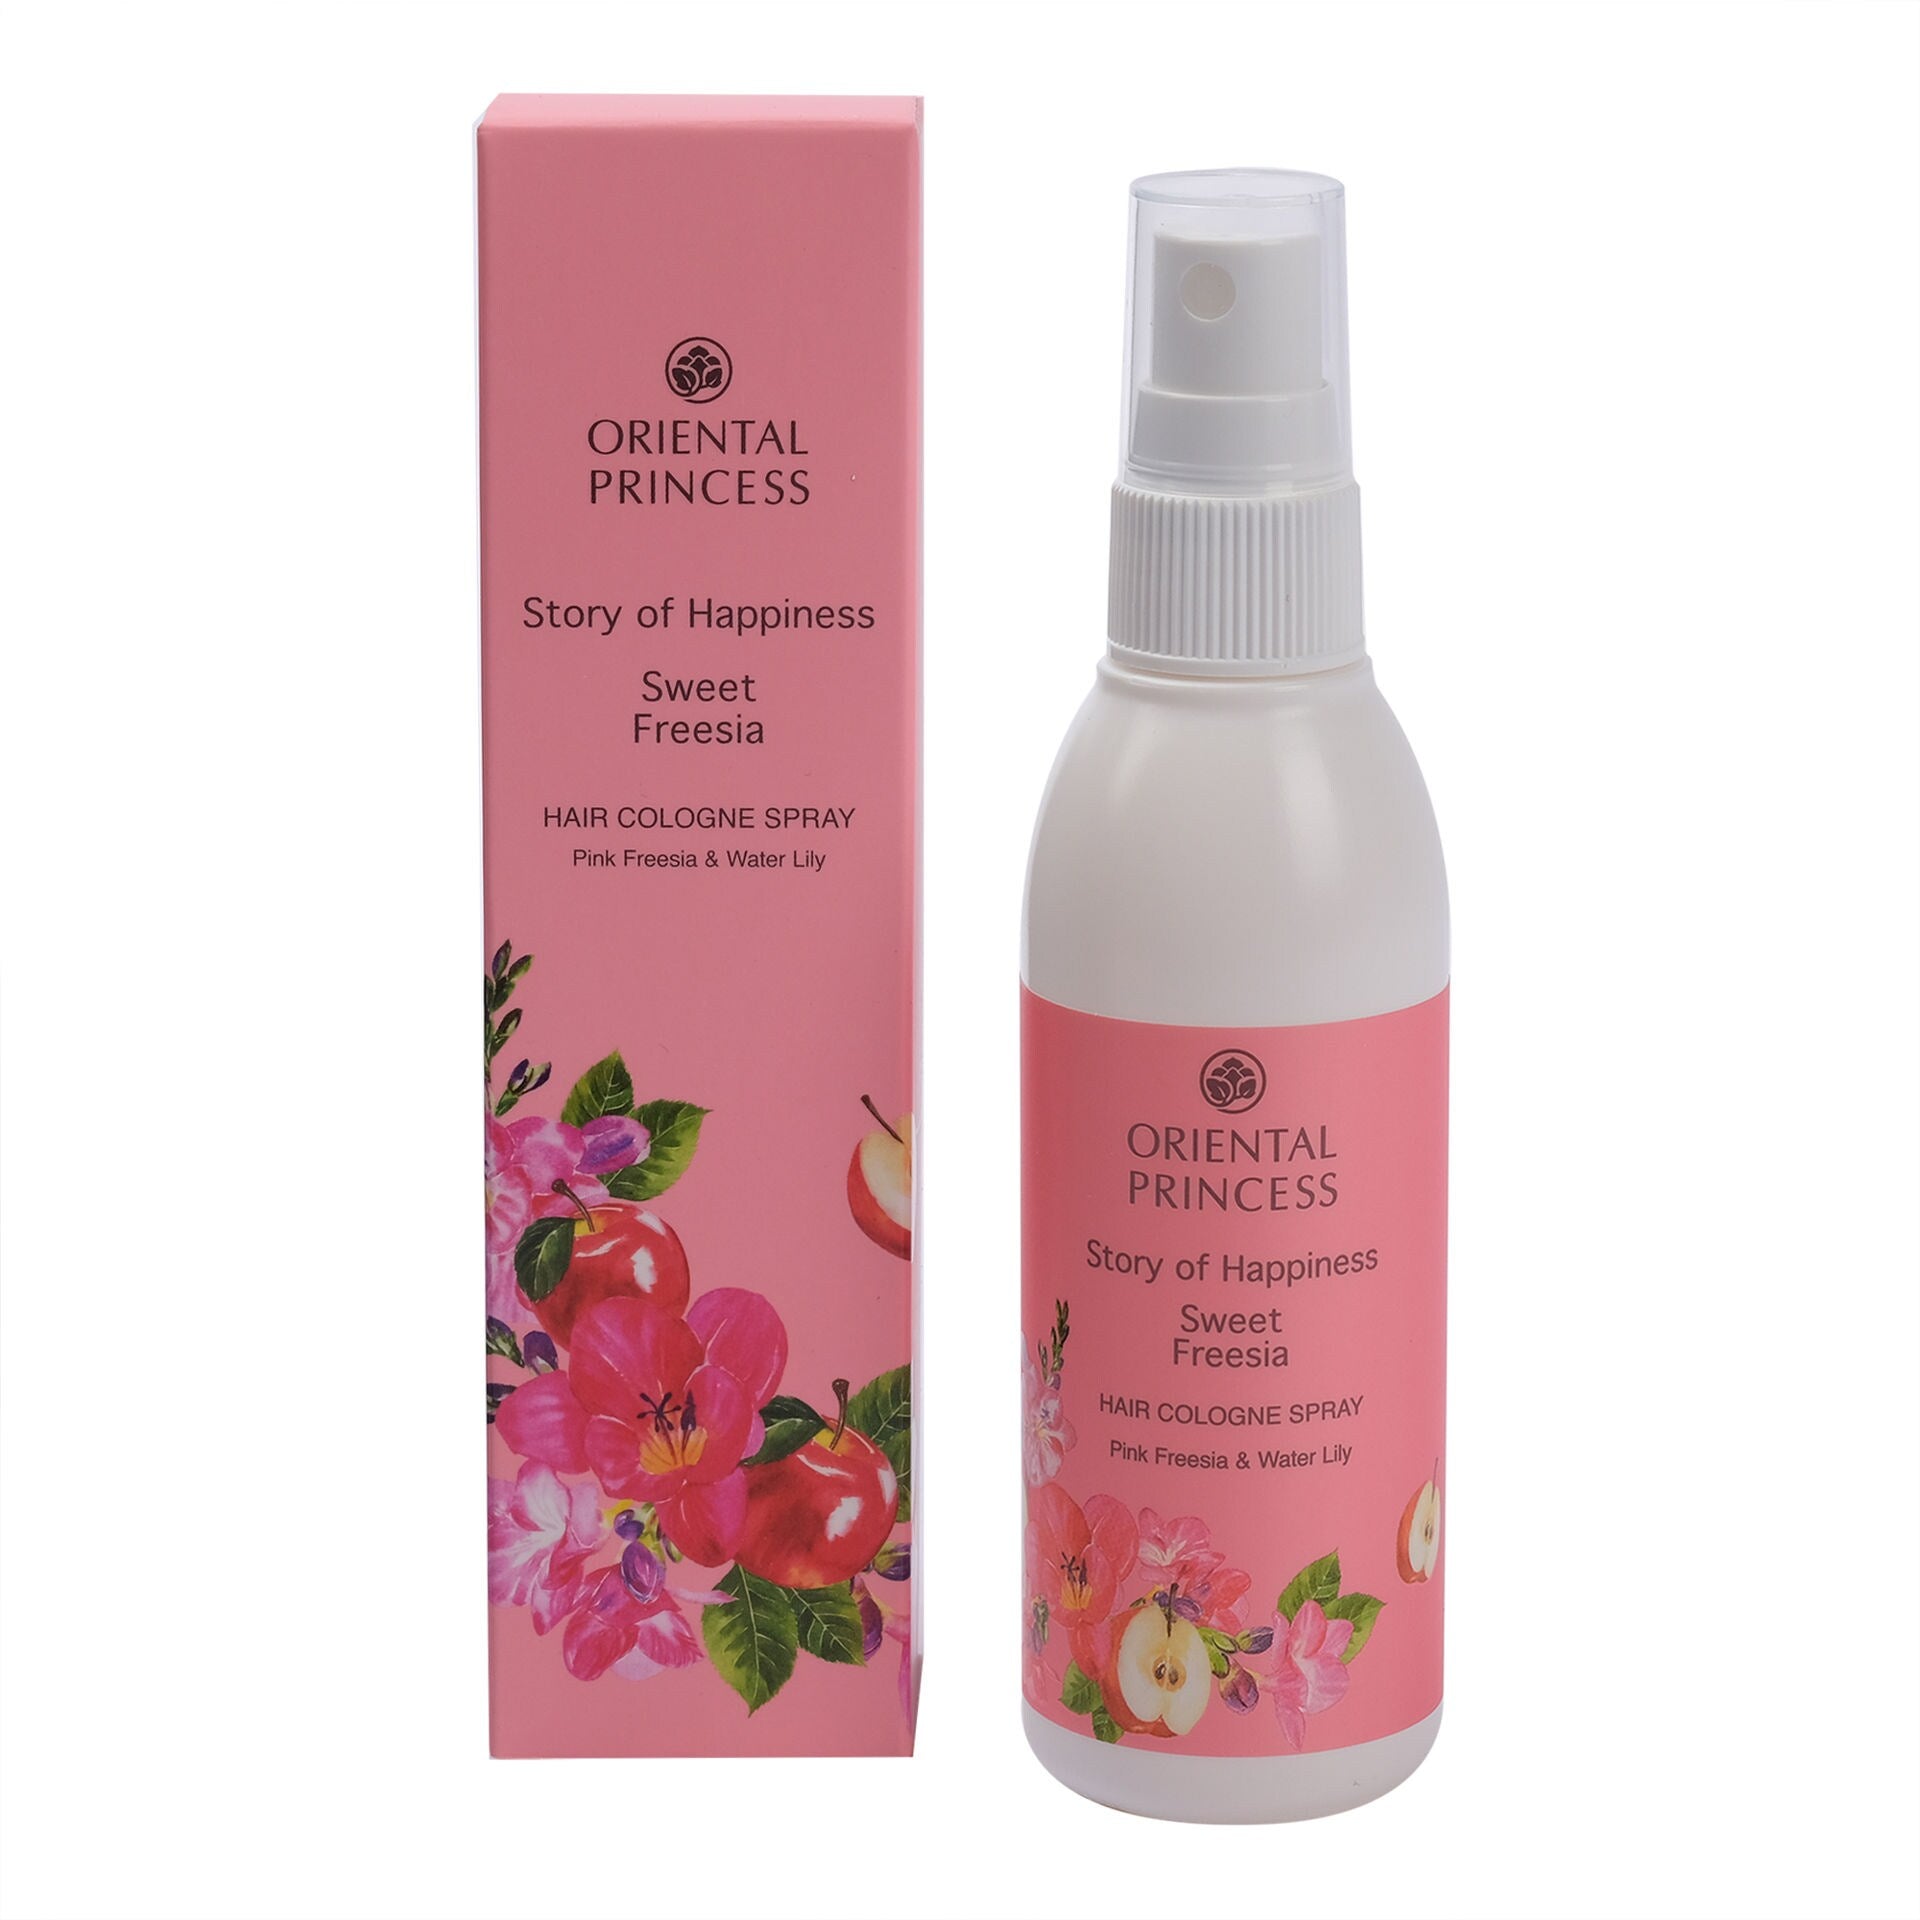 Oriental Princess Story Of Happiness Sweet Freesia Hair Cologne Spray 100ml